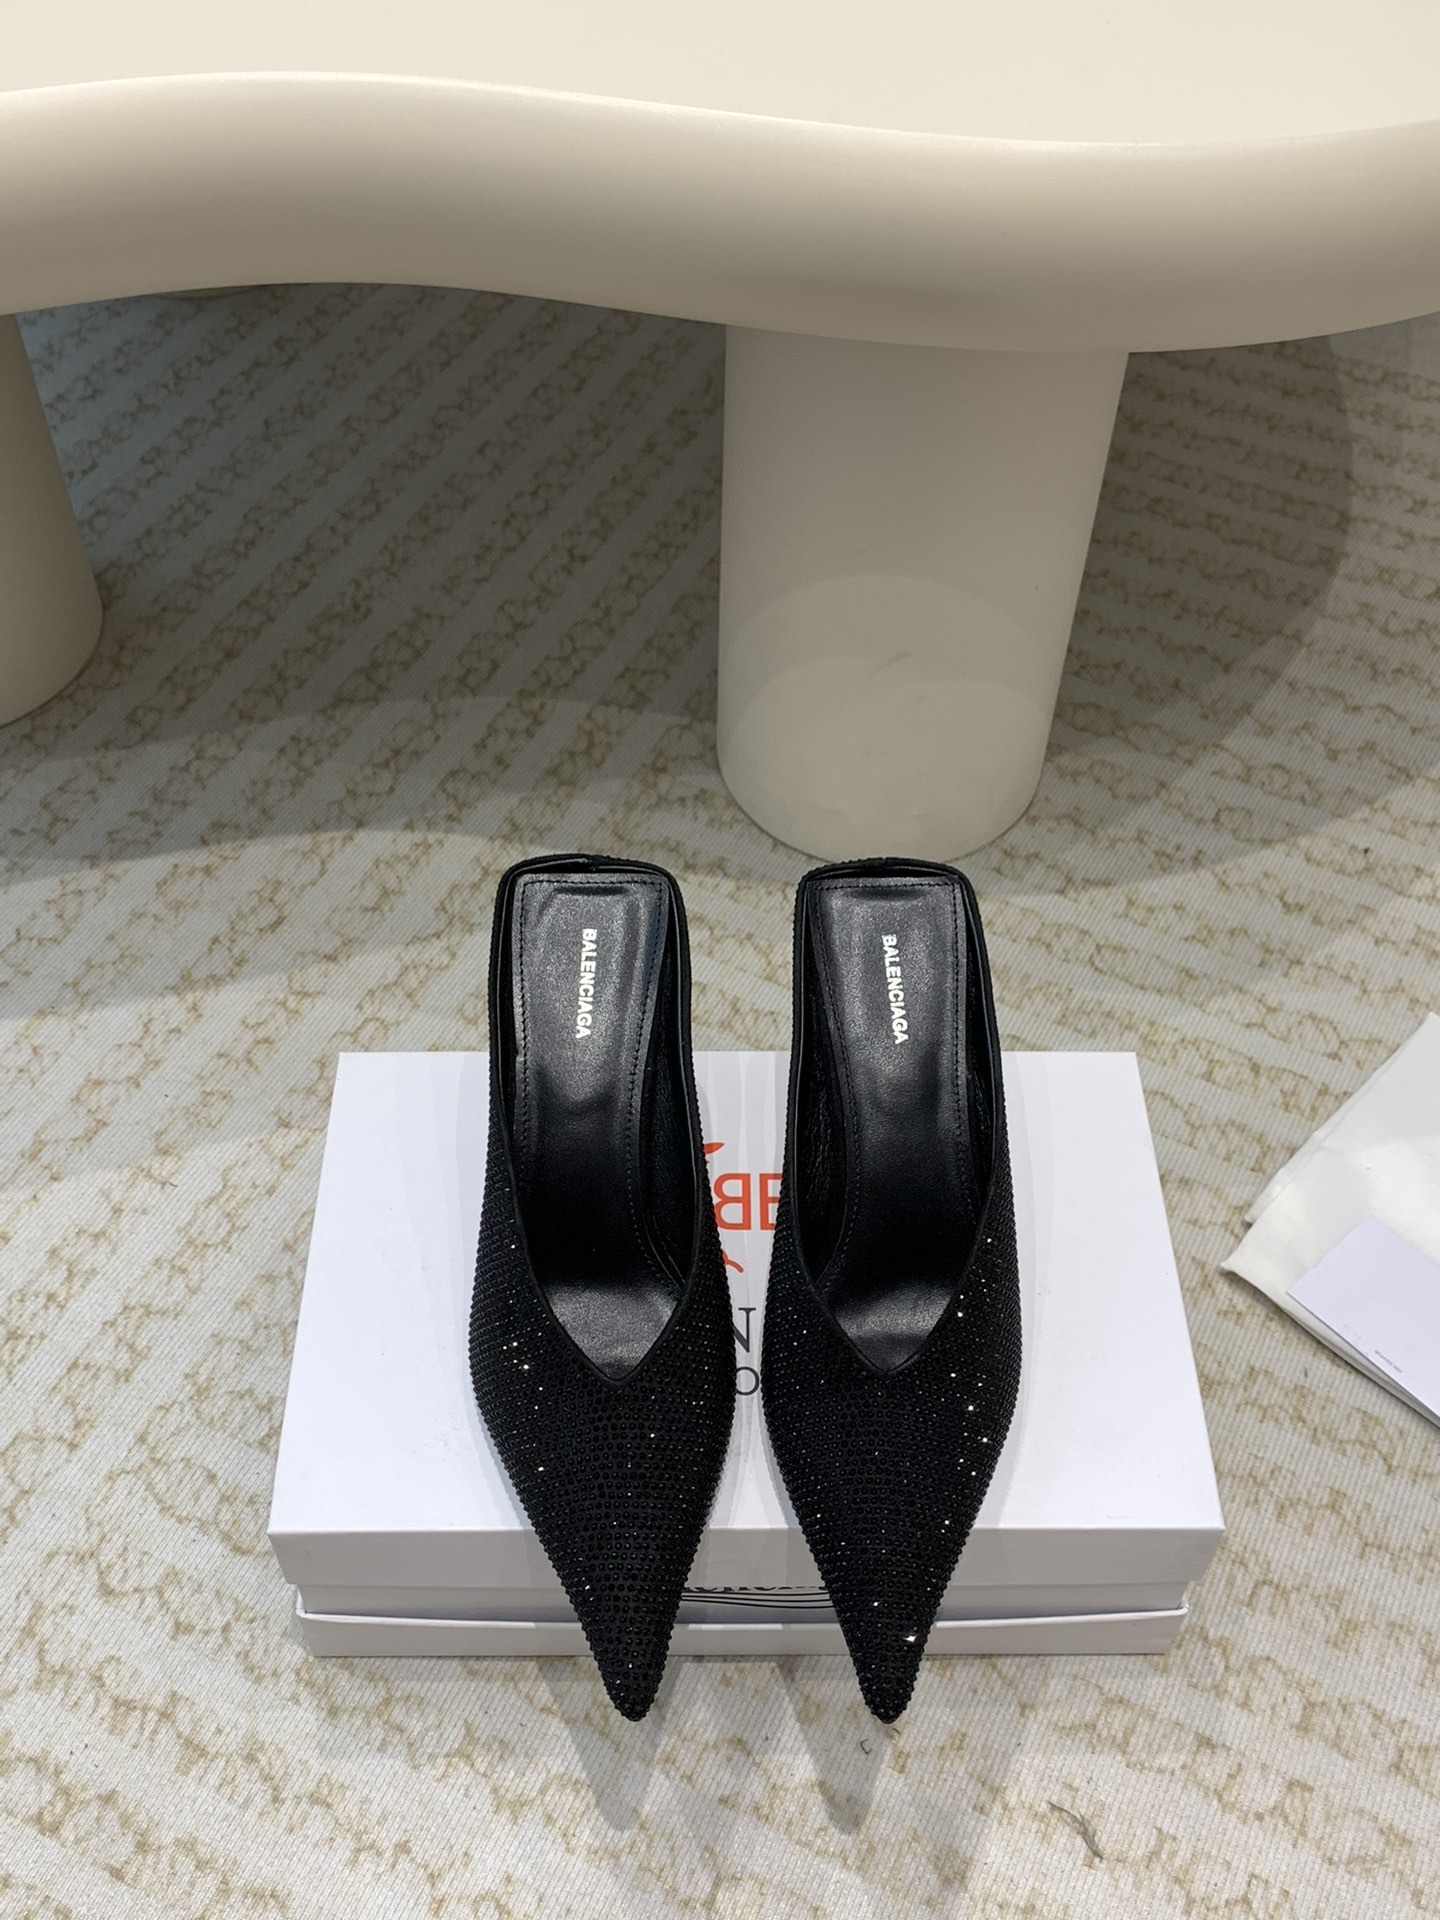 Balenciaga Store
 Shoes Half Slippers High Heel Pumps Genuine Leather Sheepskin Spring/Summer Collection